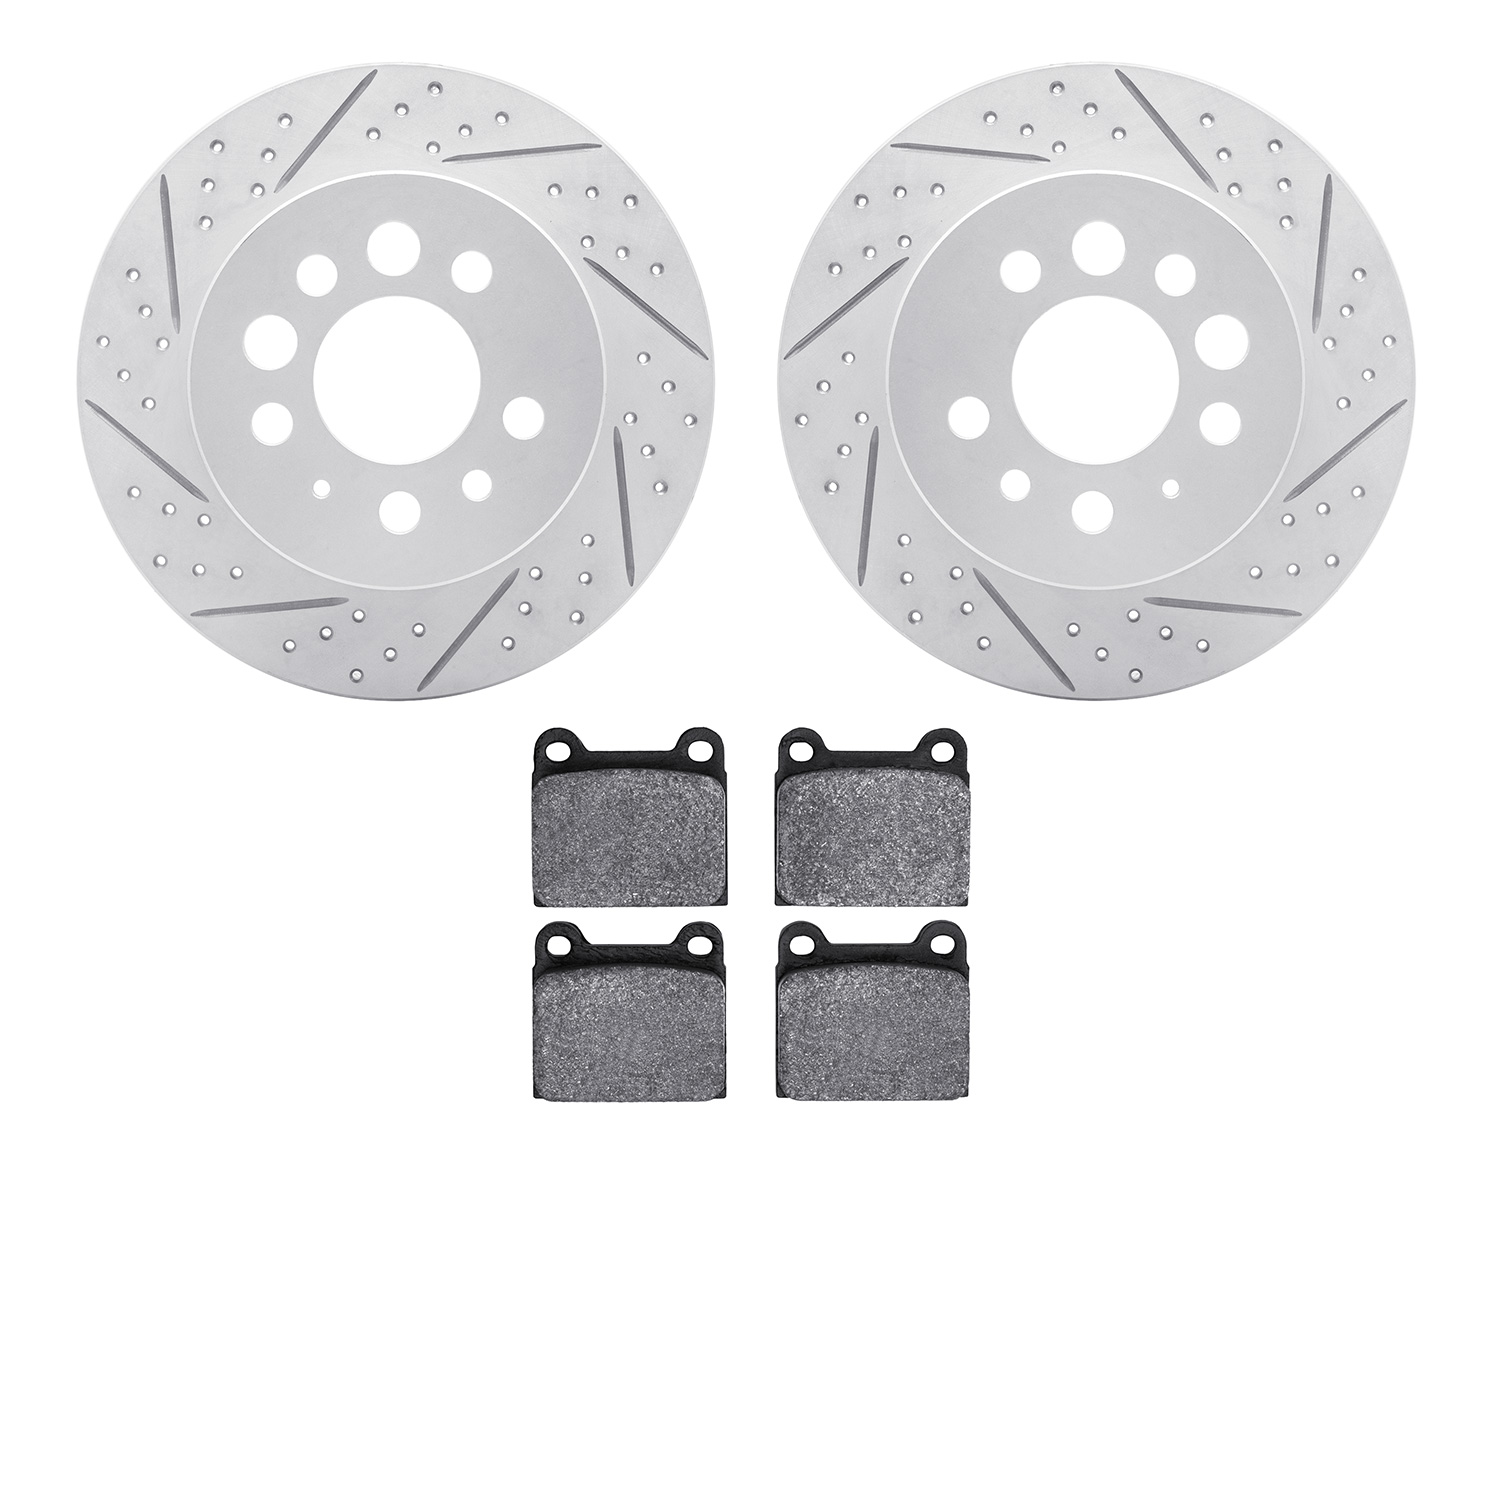 2602-27003 Geoperformance Drilled/Slotted Rotors w/5000 Euro Ceramic Brake Pads Kit, 1974-1997 Volvo, Position: Rear